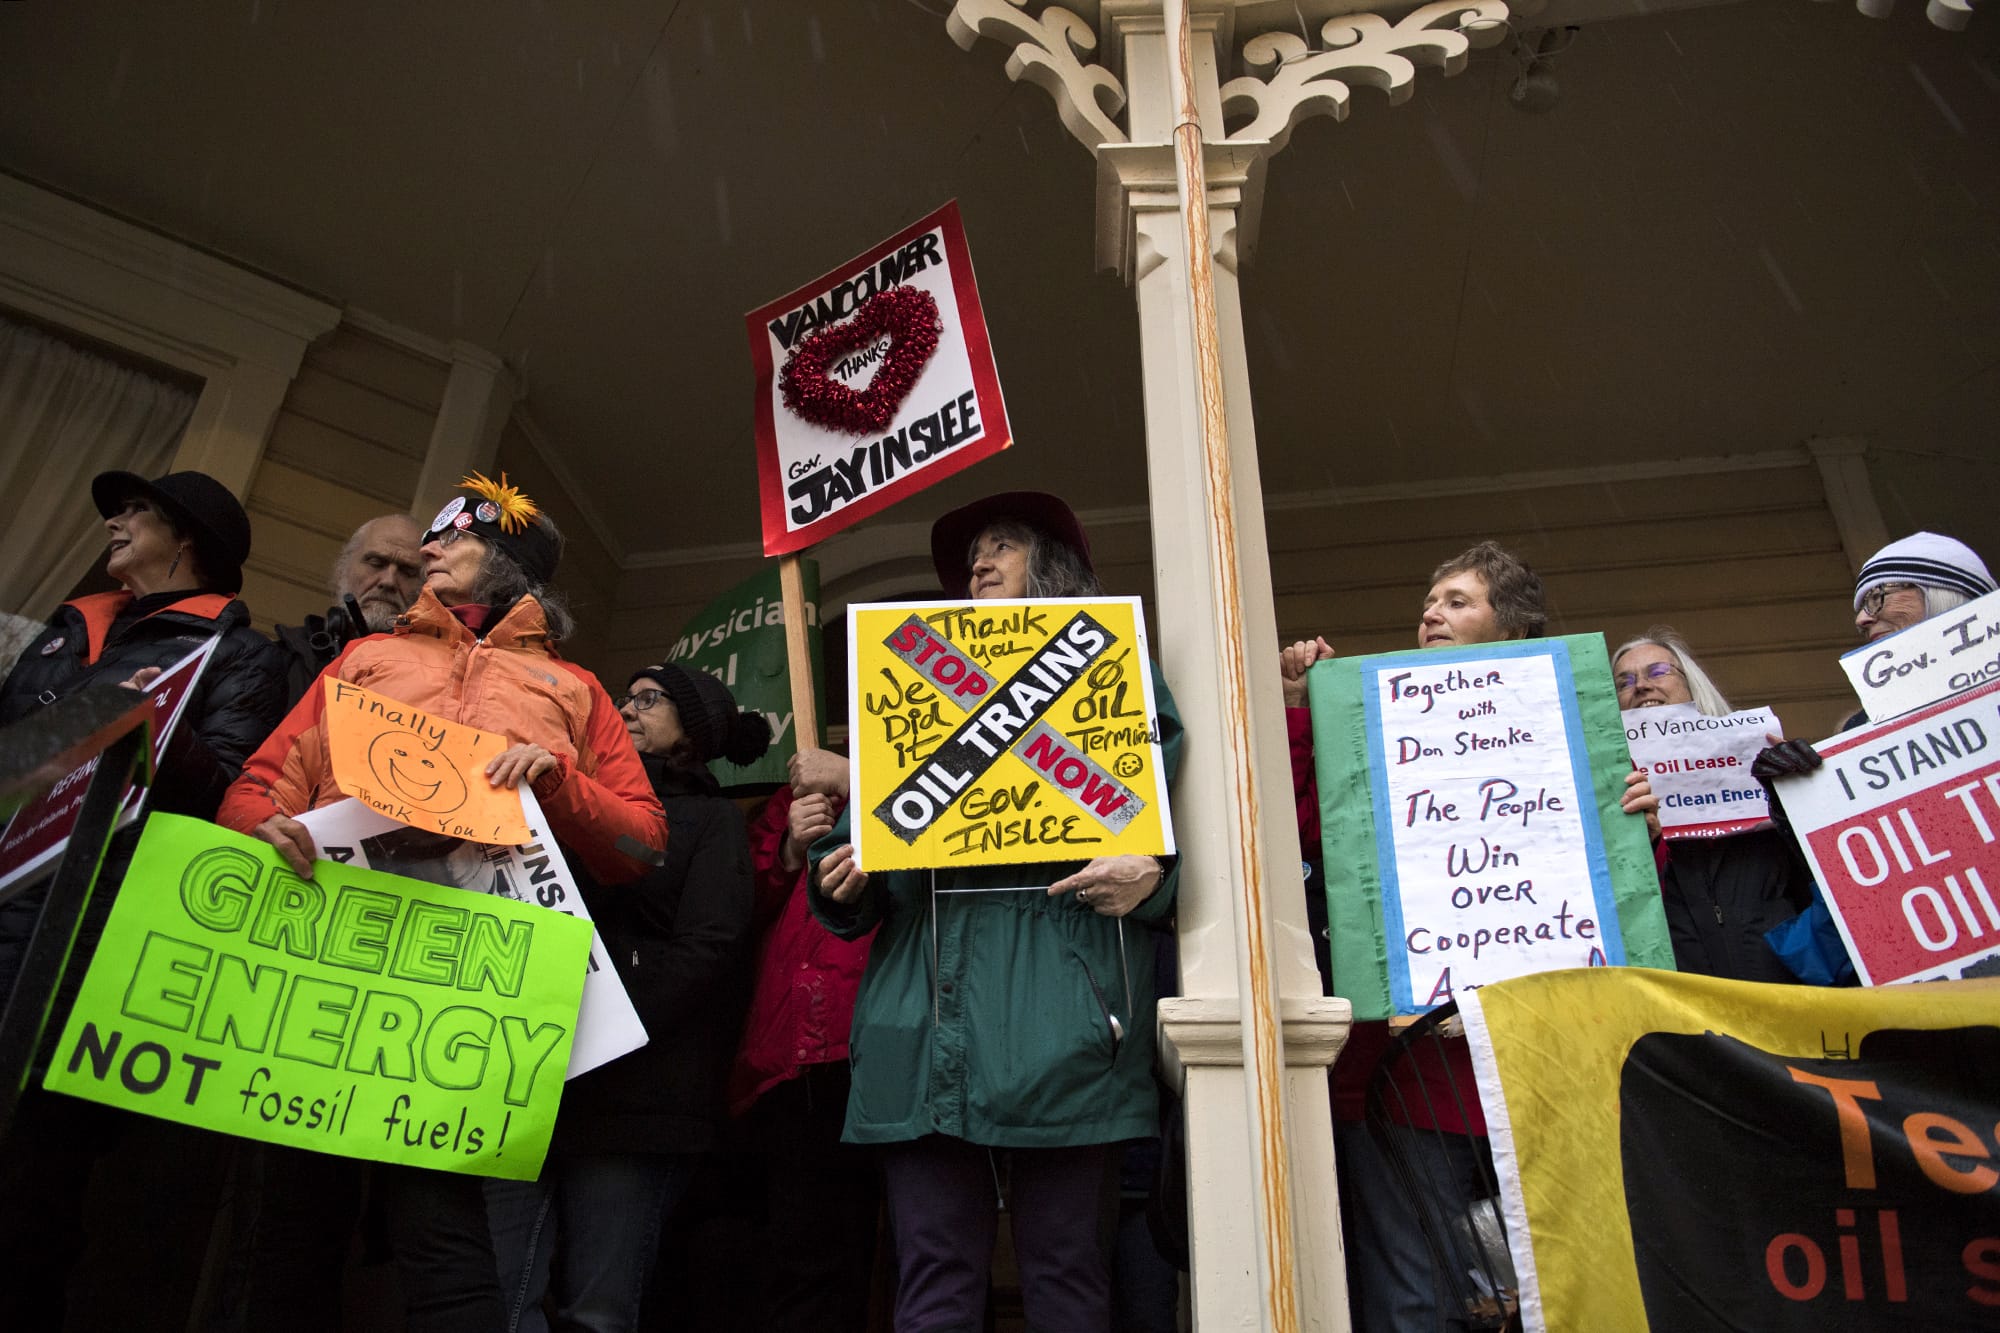 Opponents of the proposed Vancouver Energy oil-by-rail terminal celebrate the project's rejection Monday by Washington Gov. Jay Inslee at the Slocum House in downtown Vancouver on Jan. 29, 2018.